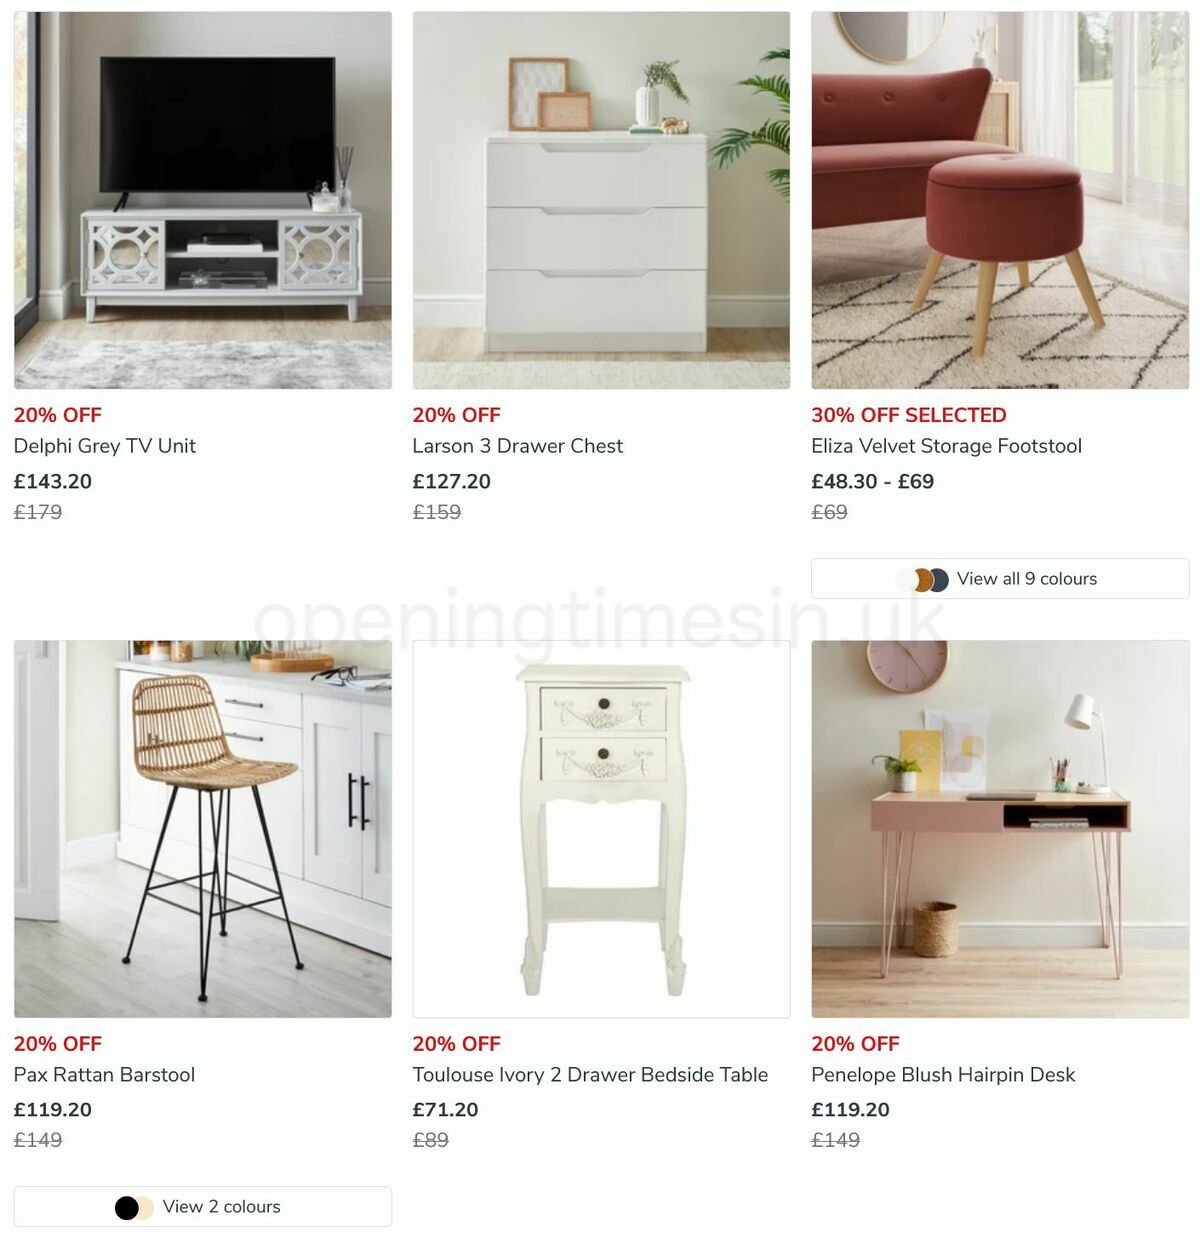 Dunelm Offers from 28 May